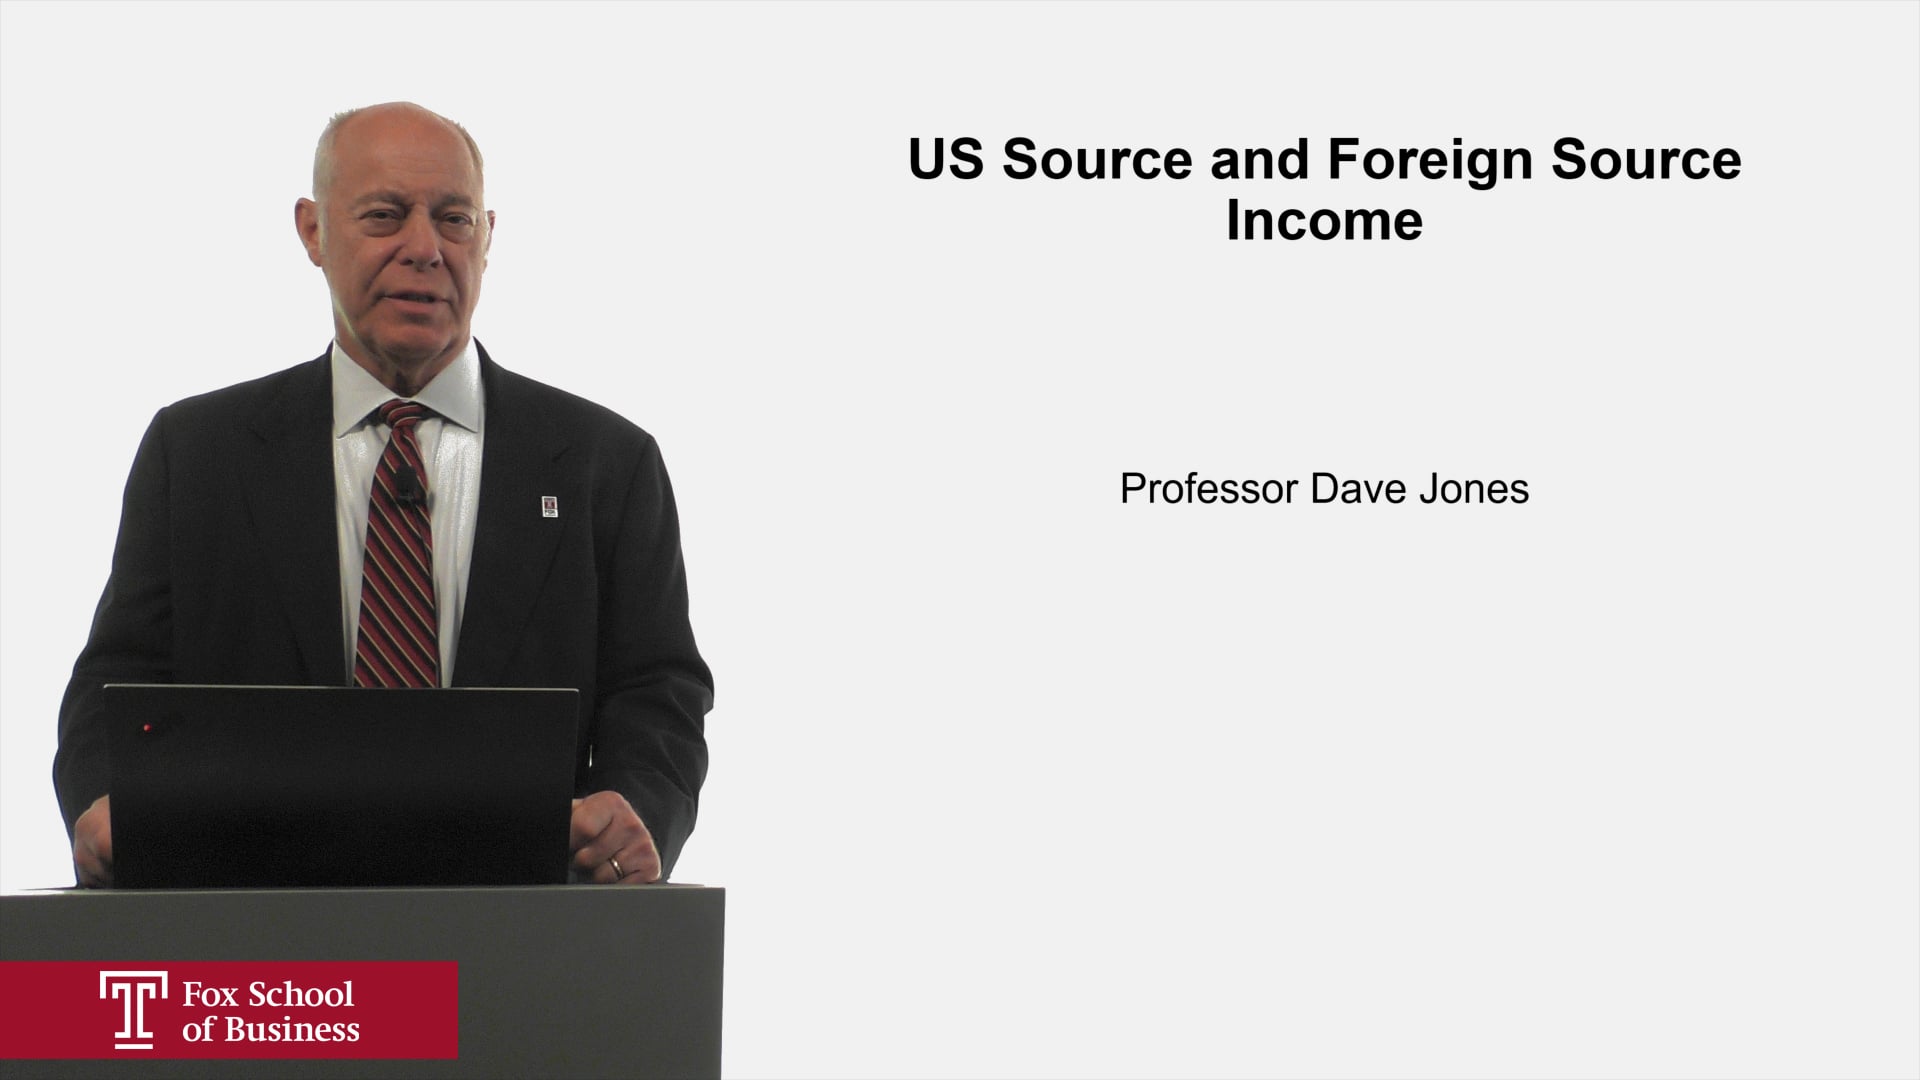 US Source and Foreign Source Income